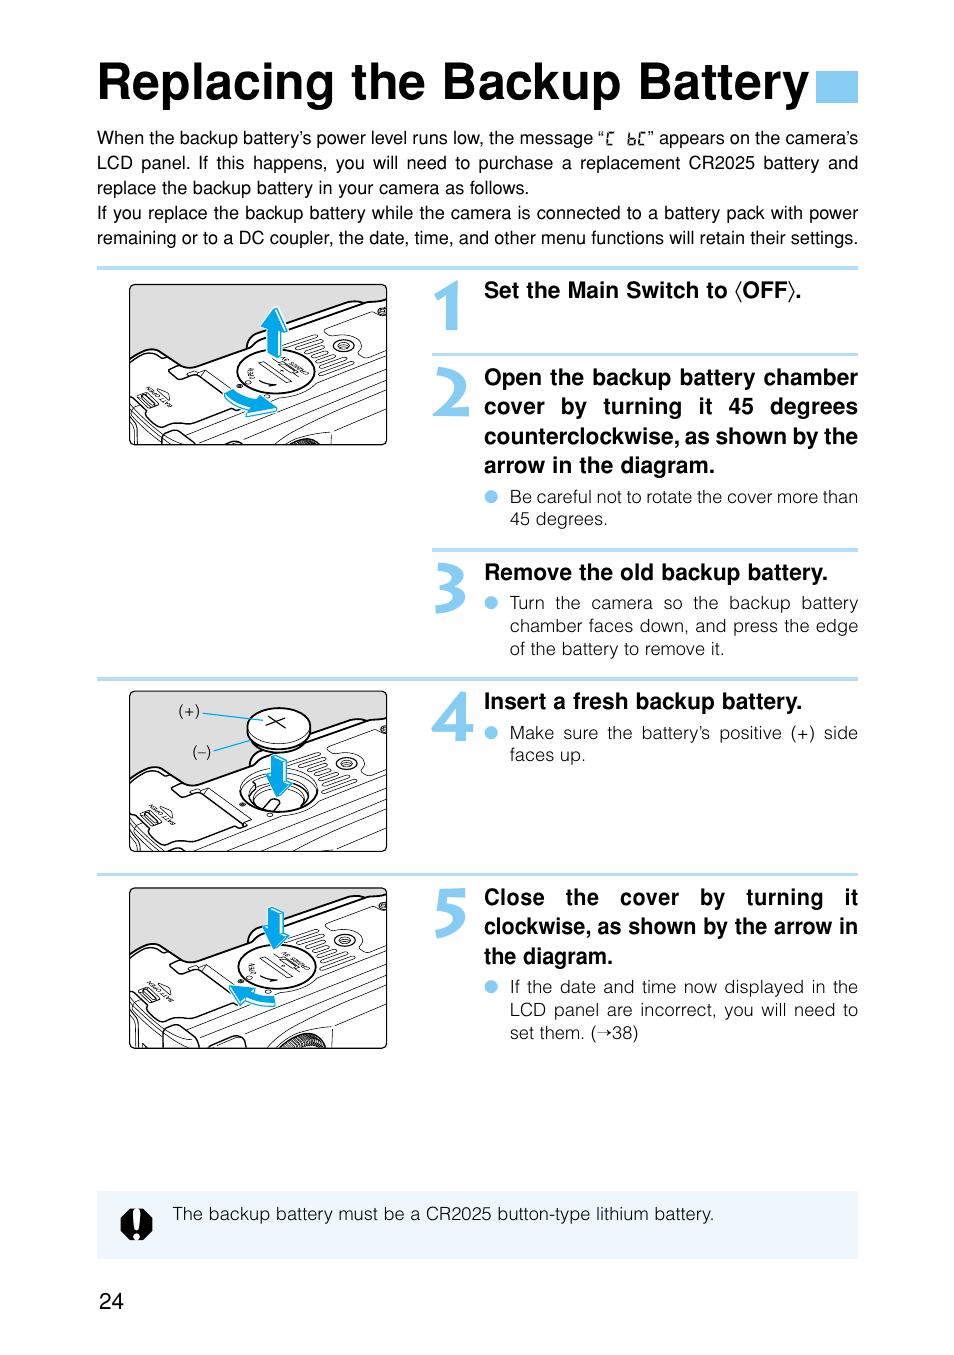 Replacing the backup battery | Canon EOS D30 User Manual | Page 24 / 152